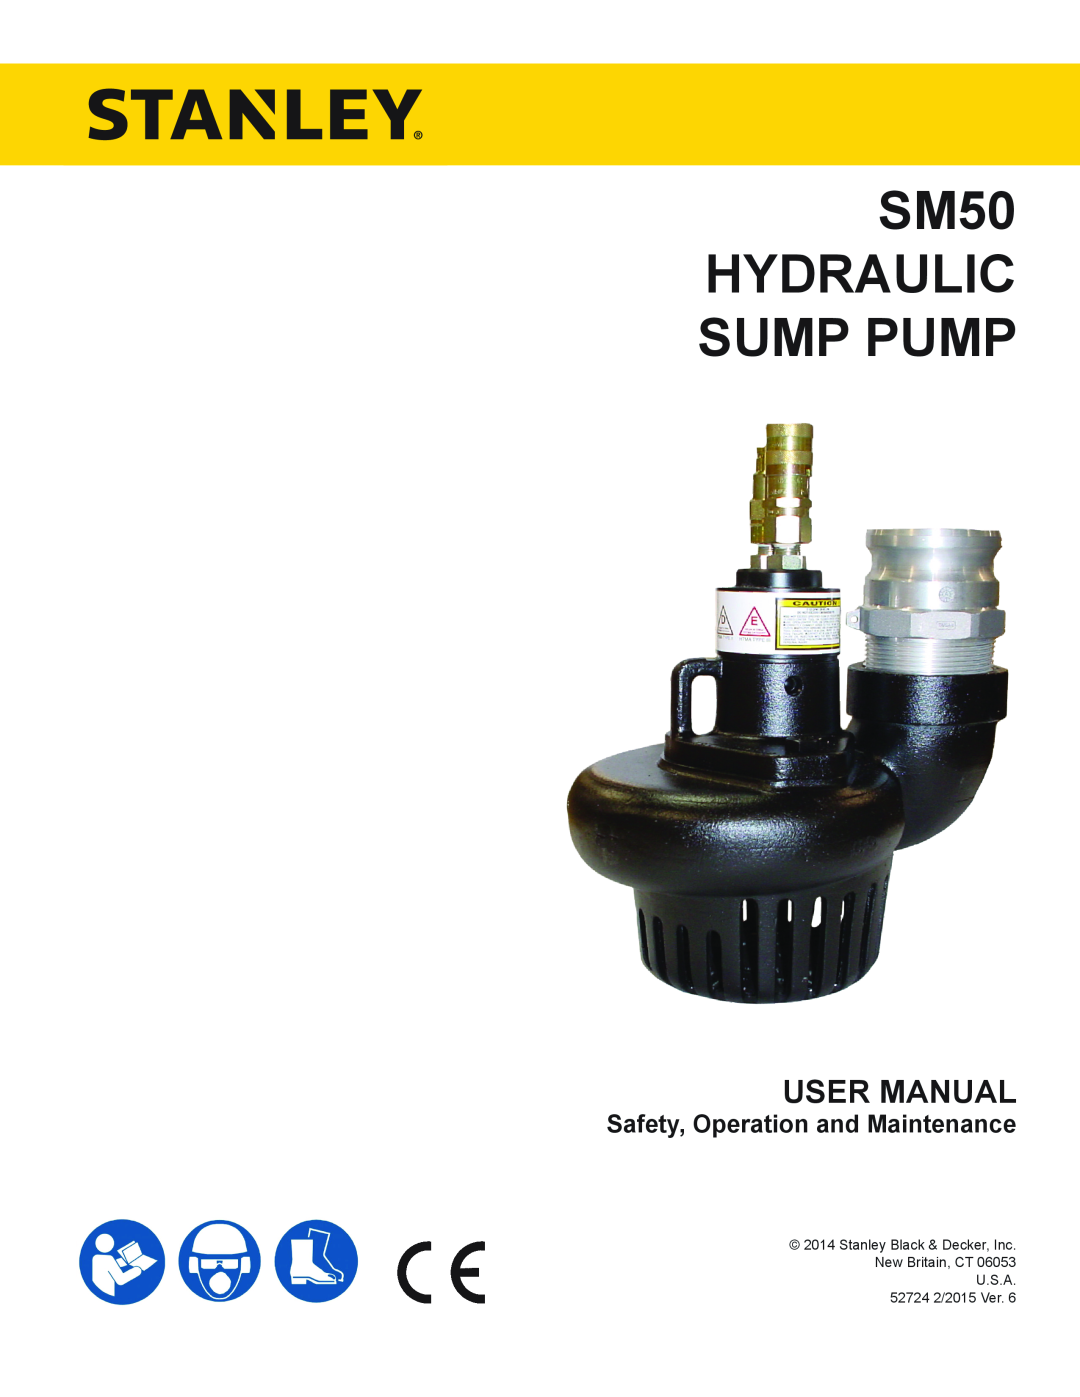 Stanley Black & Decker user manual Safety, Operation and Maintenance, SM50 HYDRAULIC SUMP PUMP 